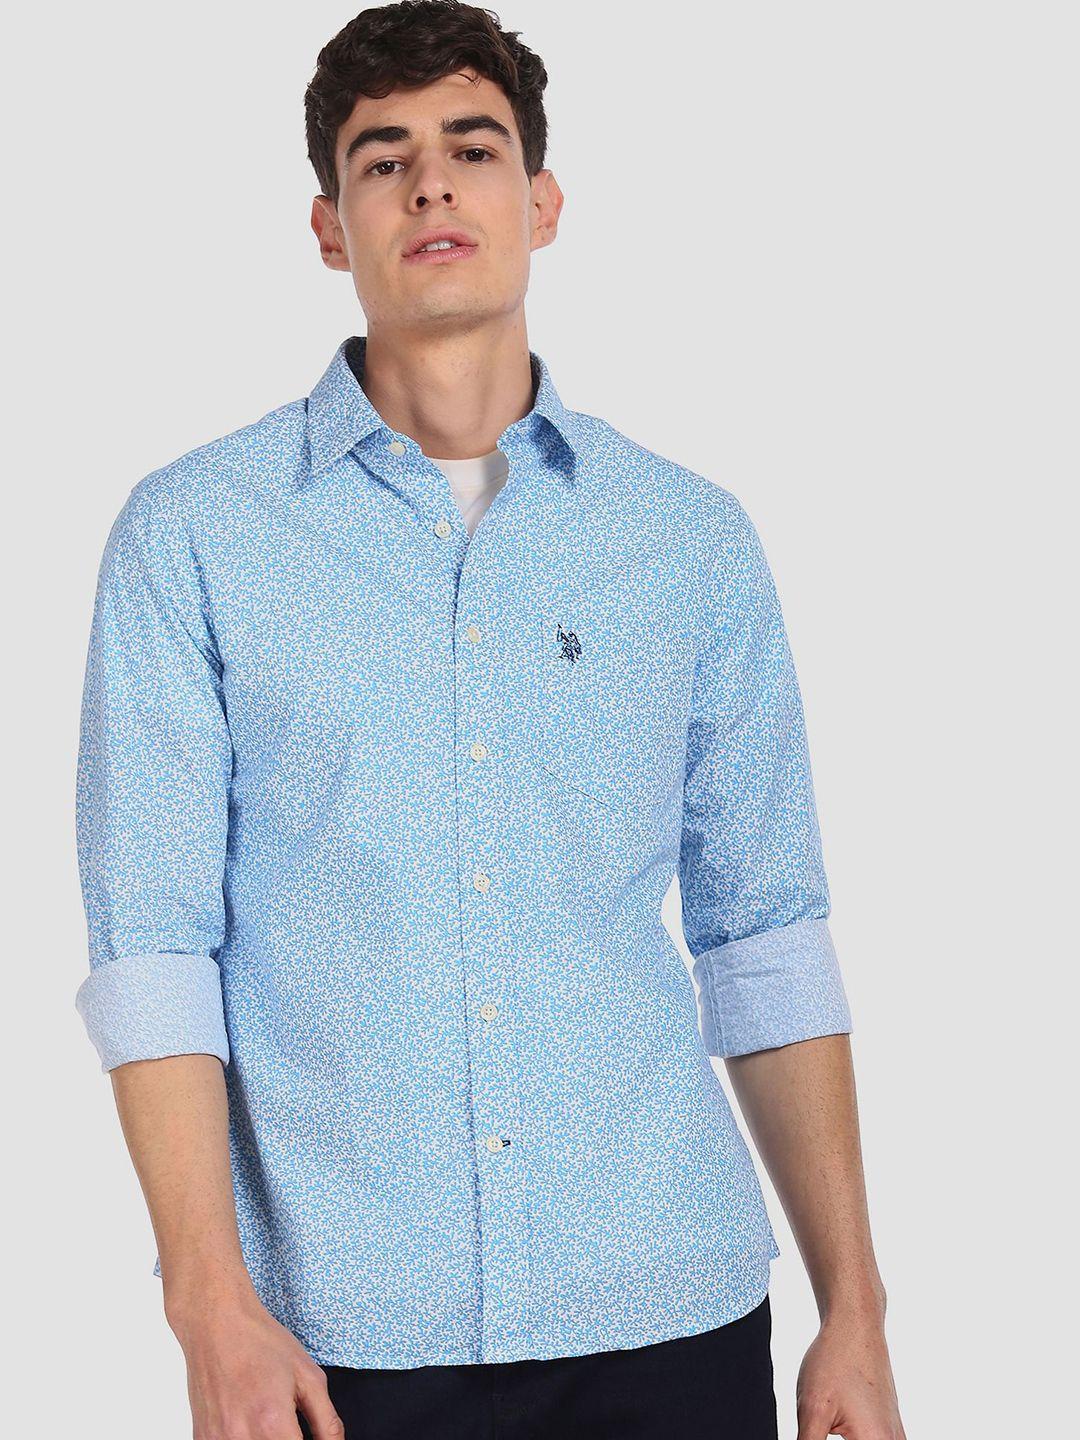 u.s. polo assn. men white & blue tailored fit printed casual shirt